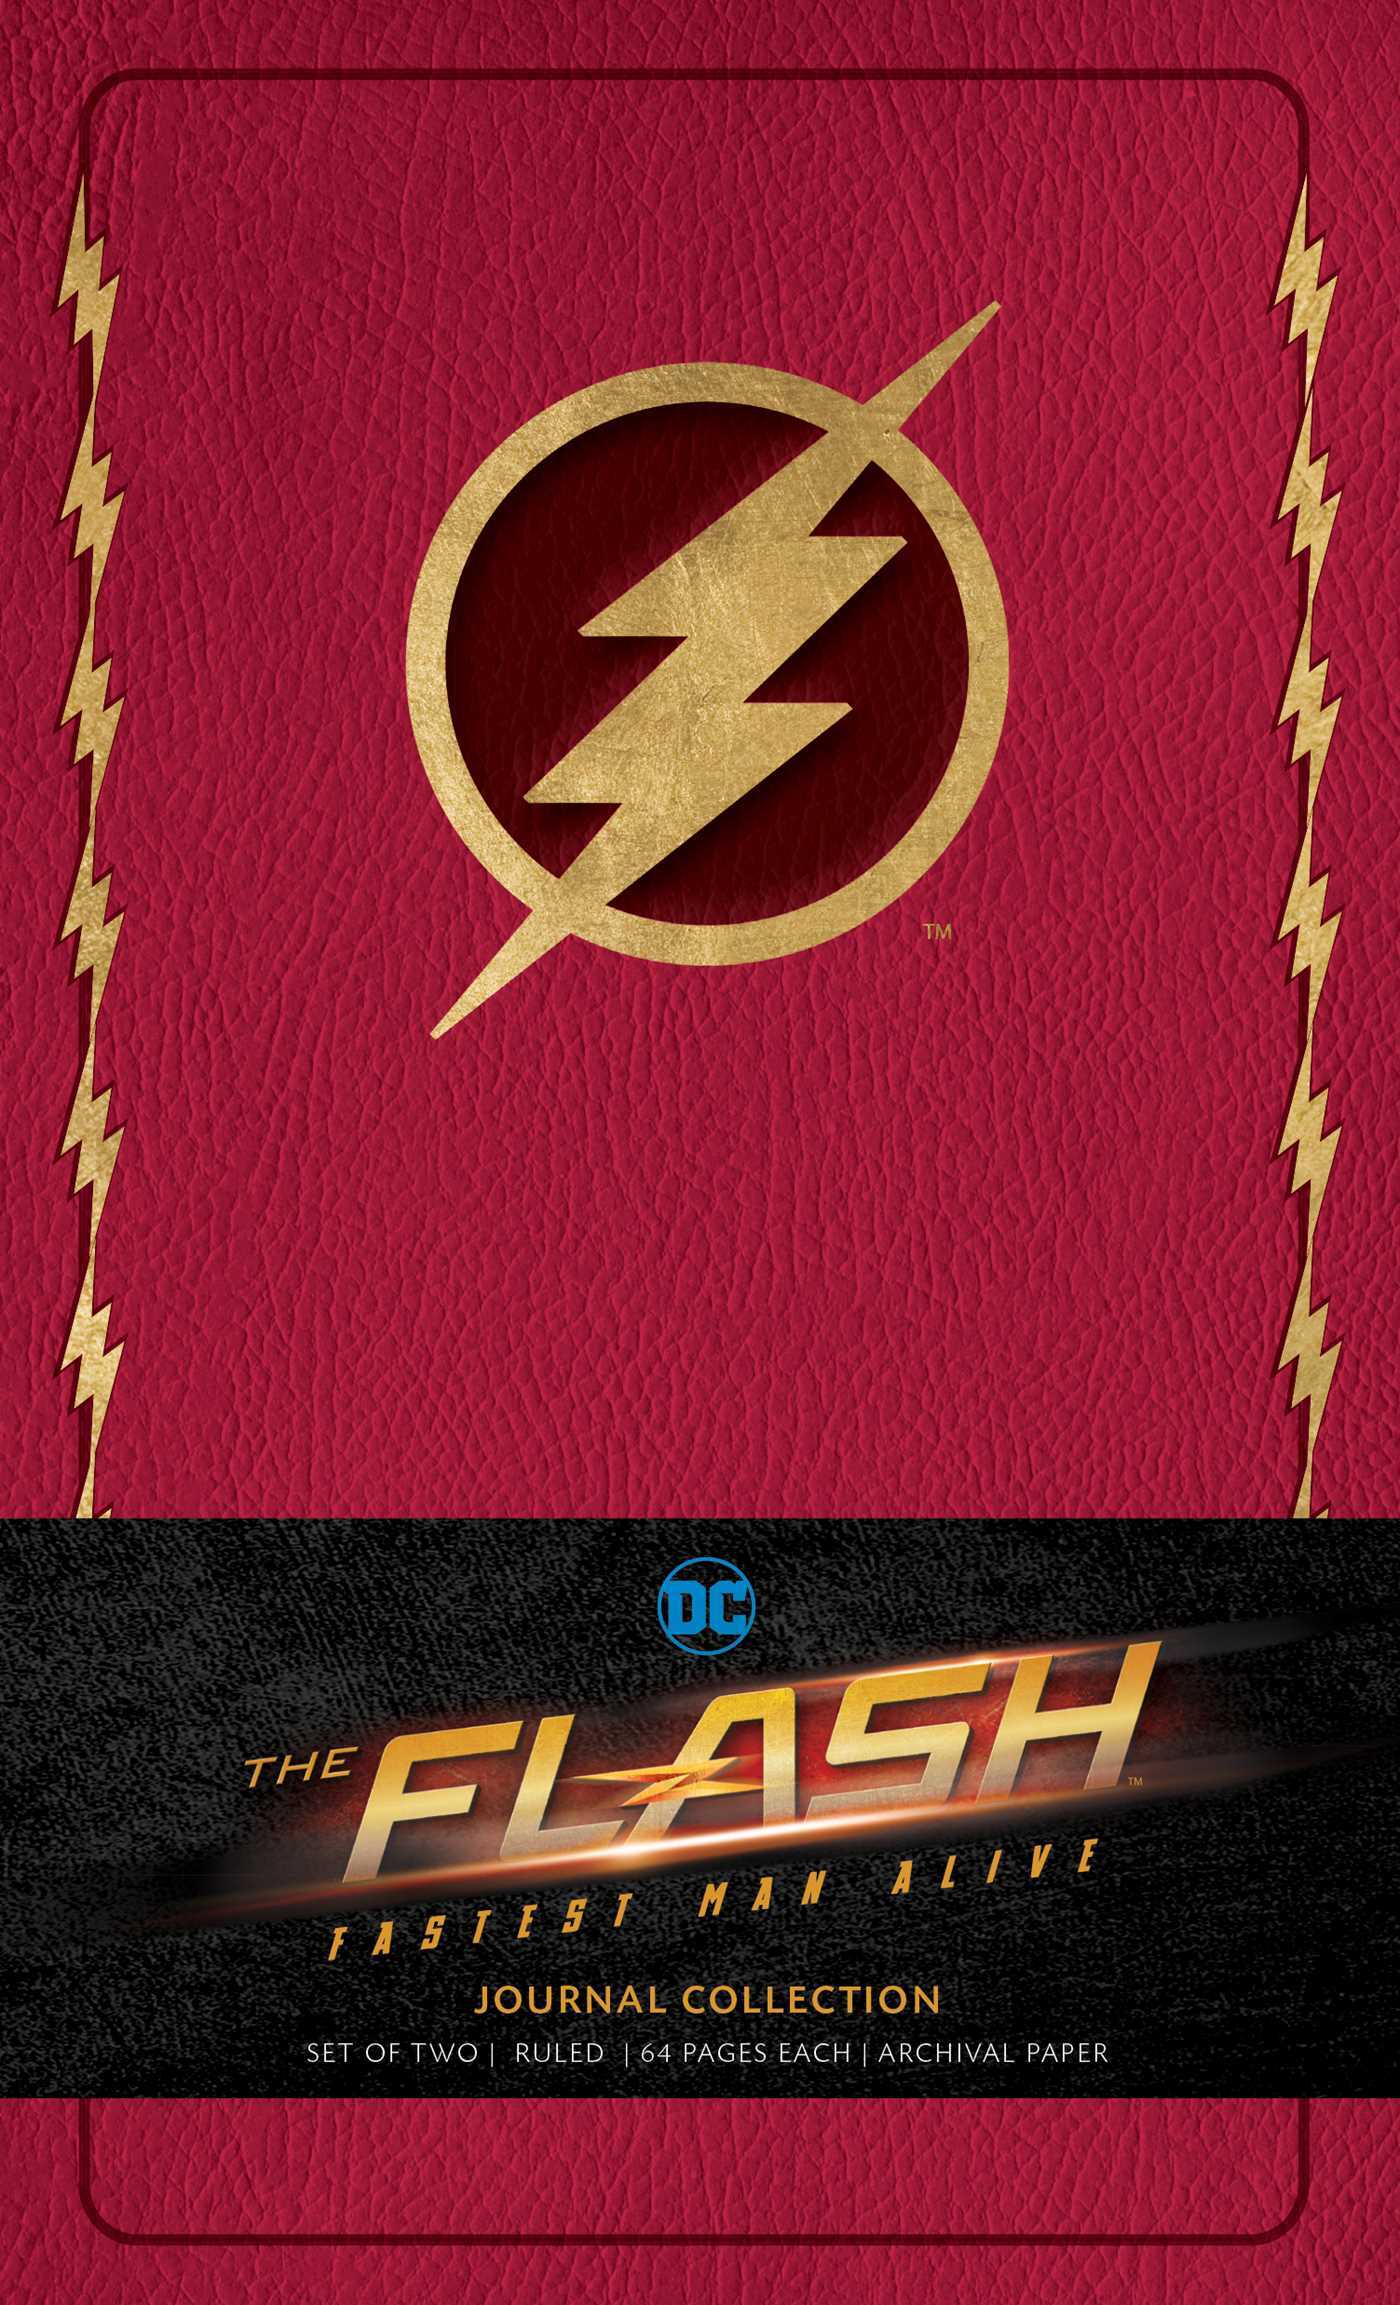 ISBN The Flash: Journal Collection (Set of 2) Trade Paperback